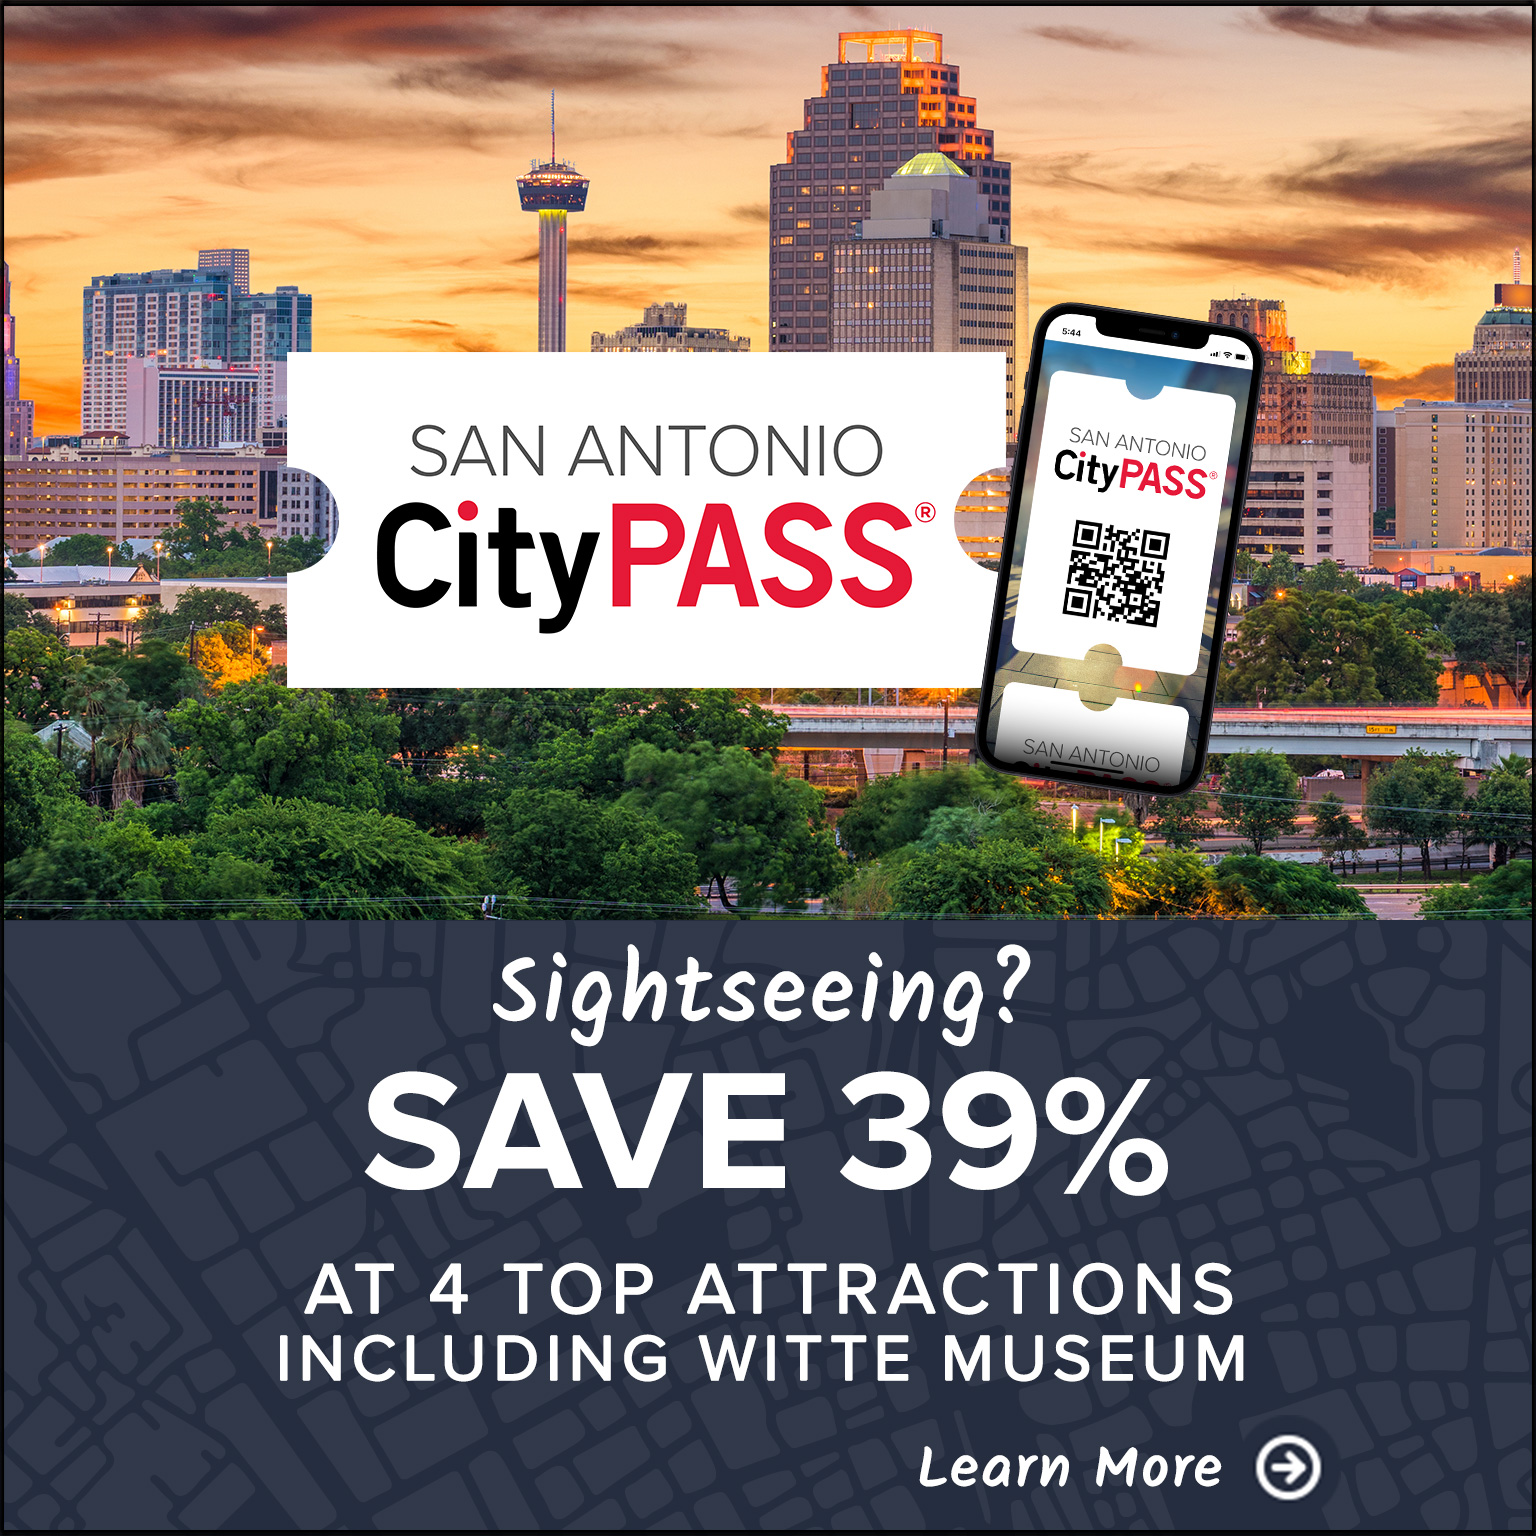 Save 39% at attractions including the Witte Museum.